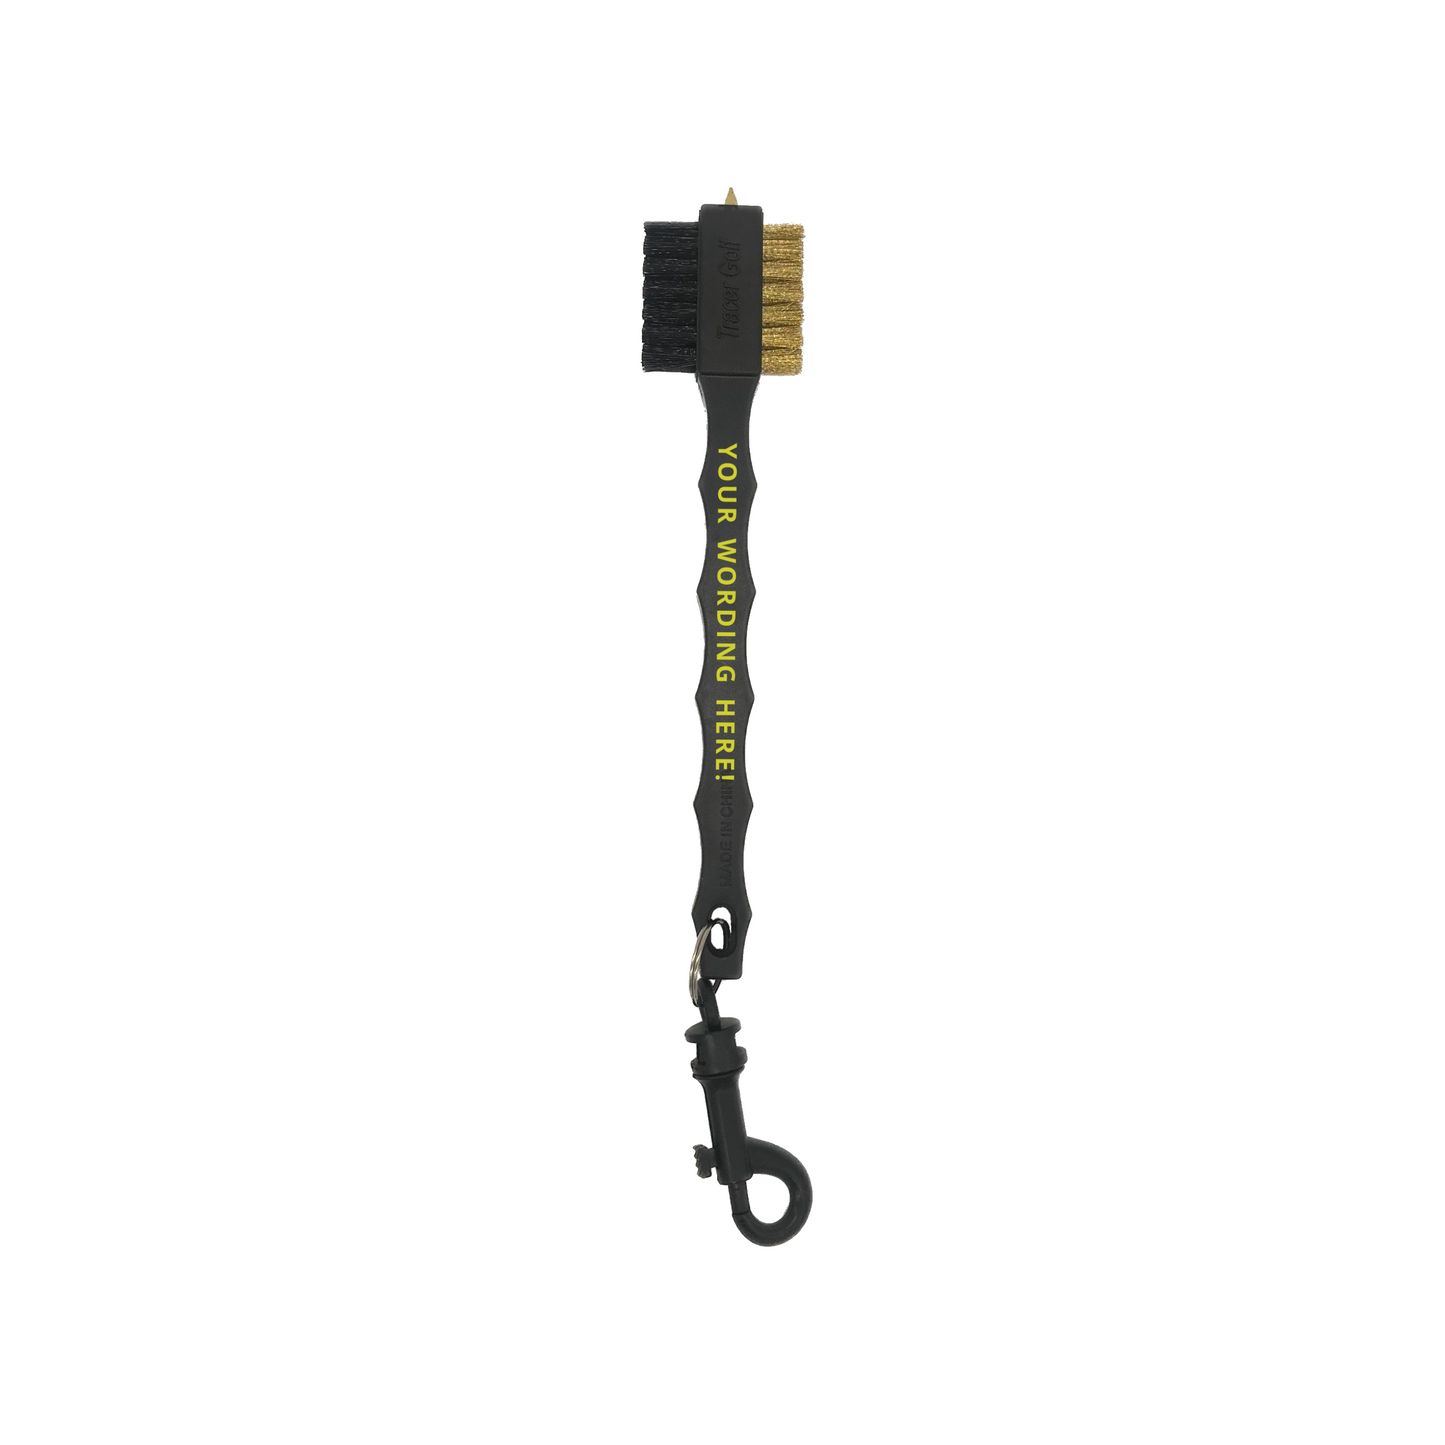 Tracer Brush (No groove point) – Tracer Golf Accessories